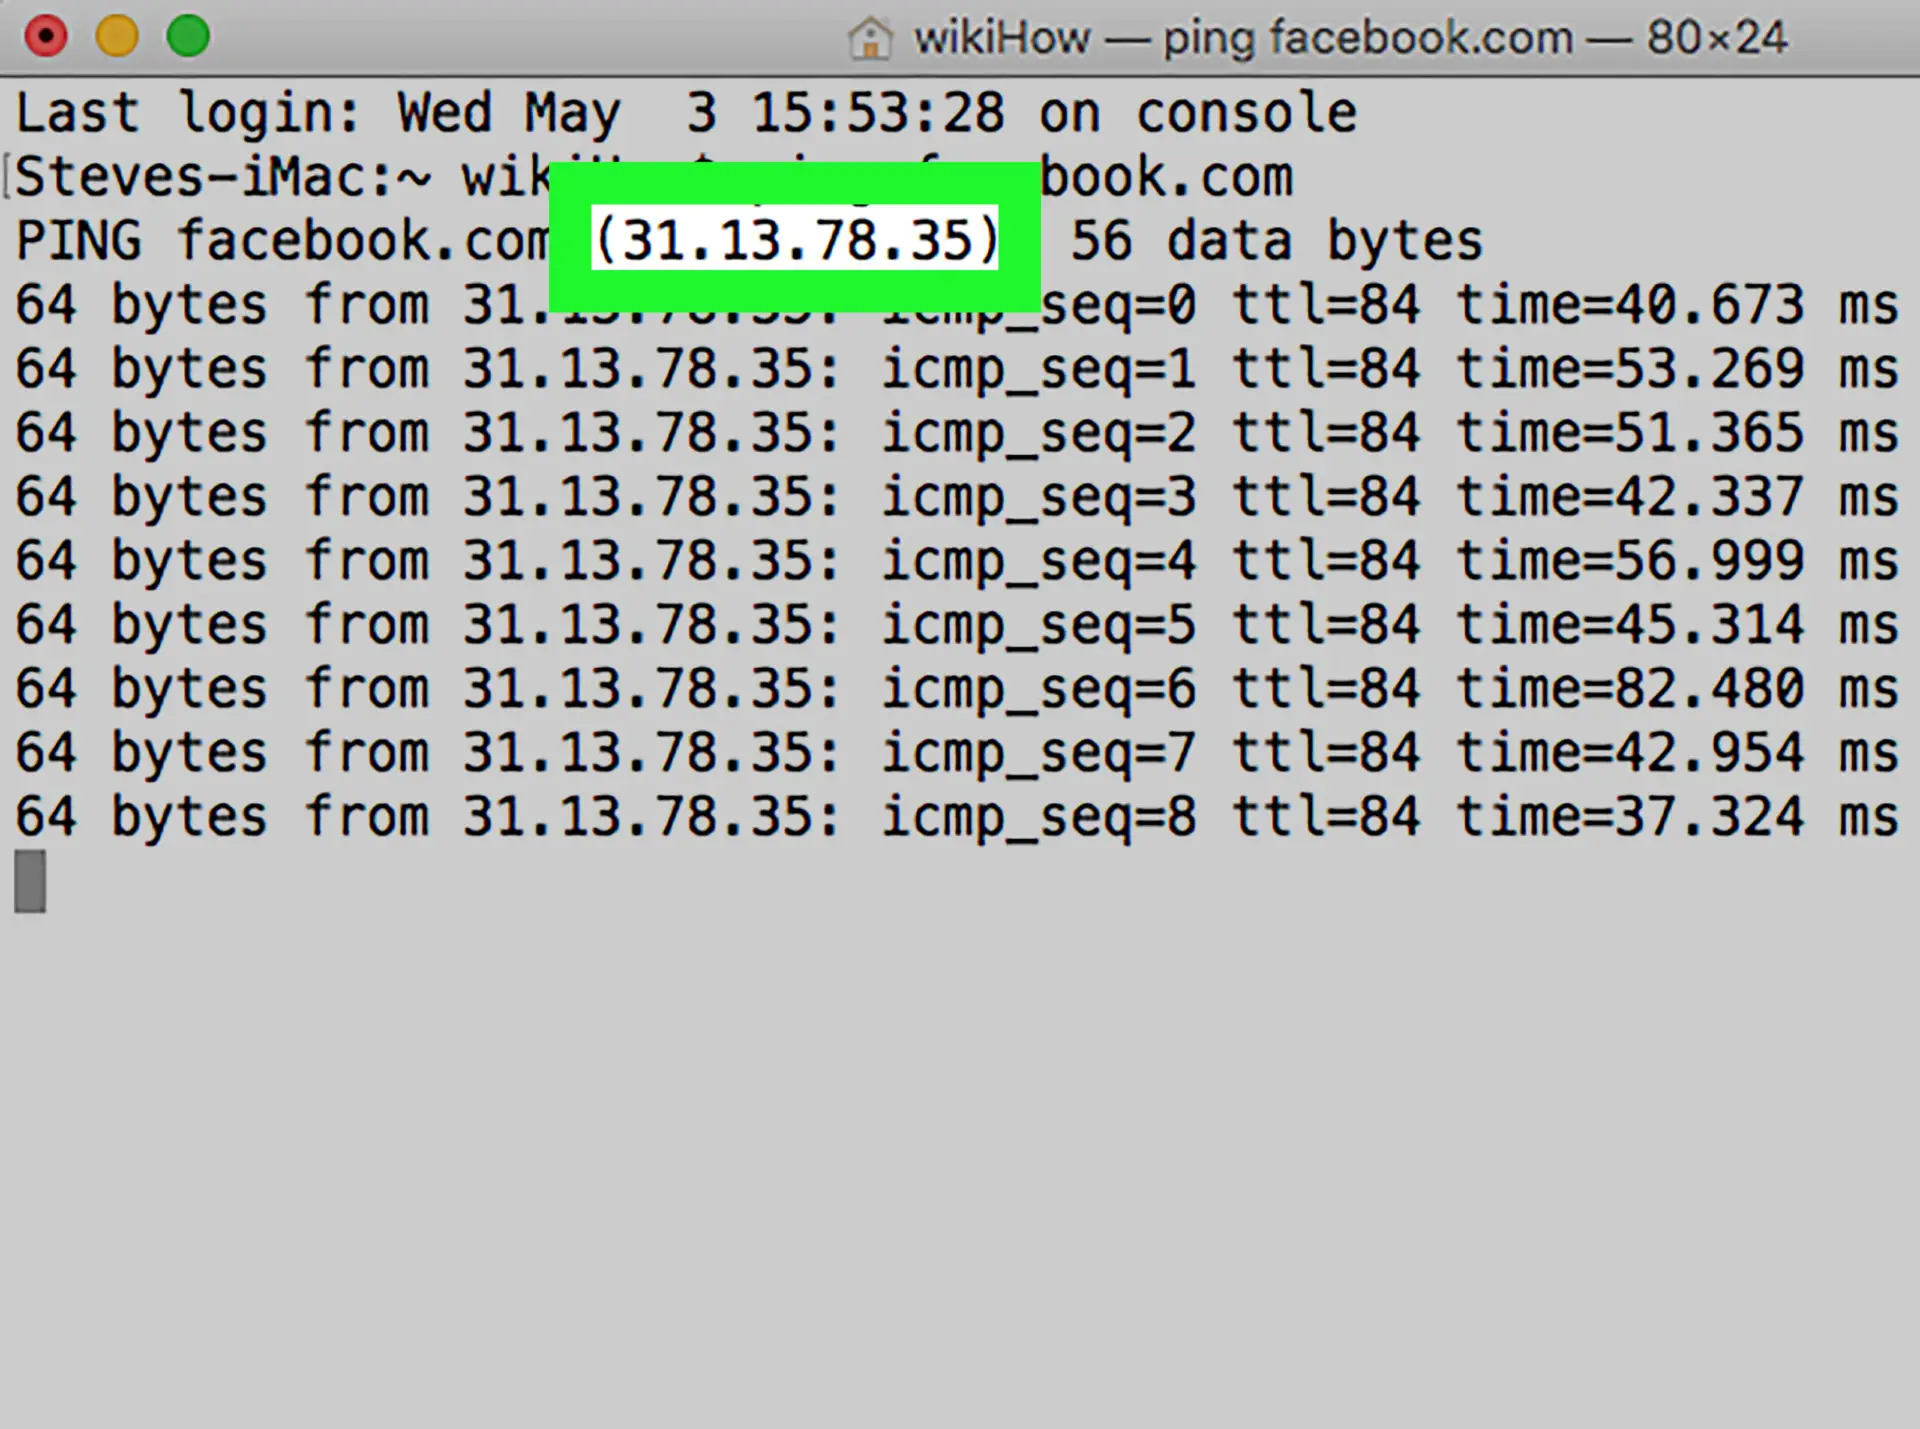 track ip address from facebook